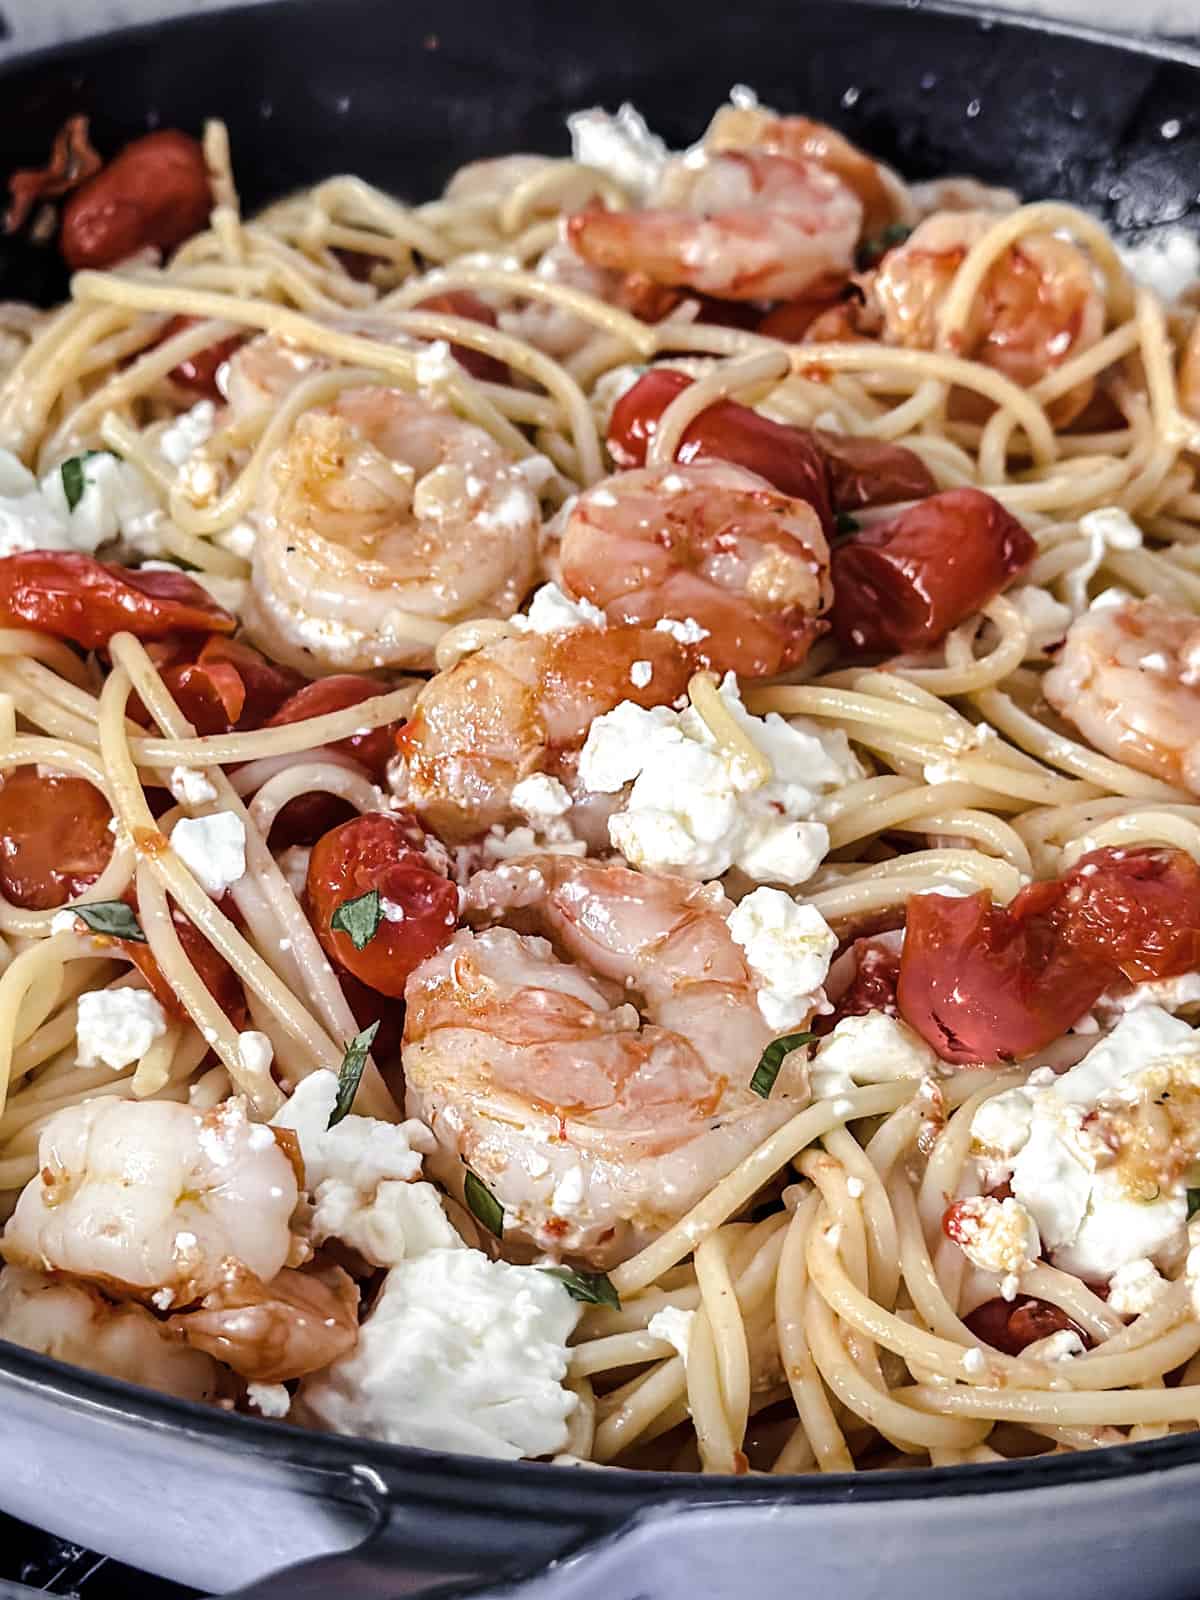 Cherry tomatoes, shrimp, and spaghetti  and chili peppers in olive oil in a large deep sauté pan.